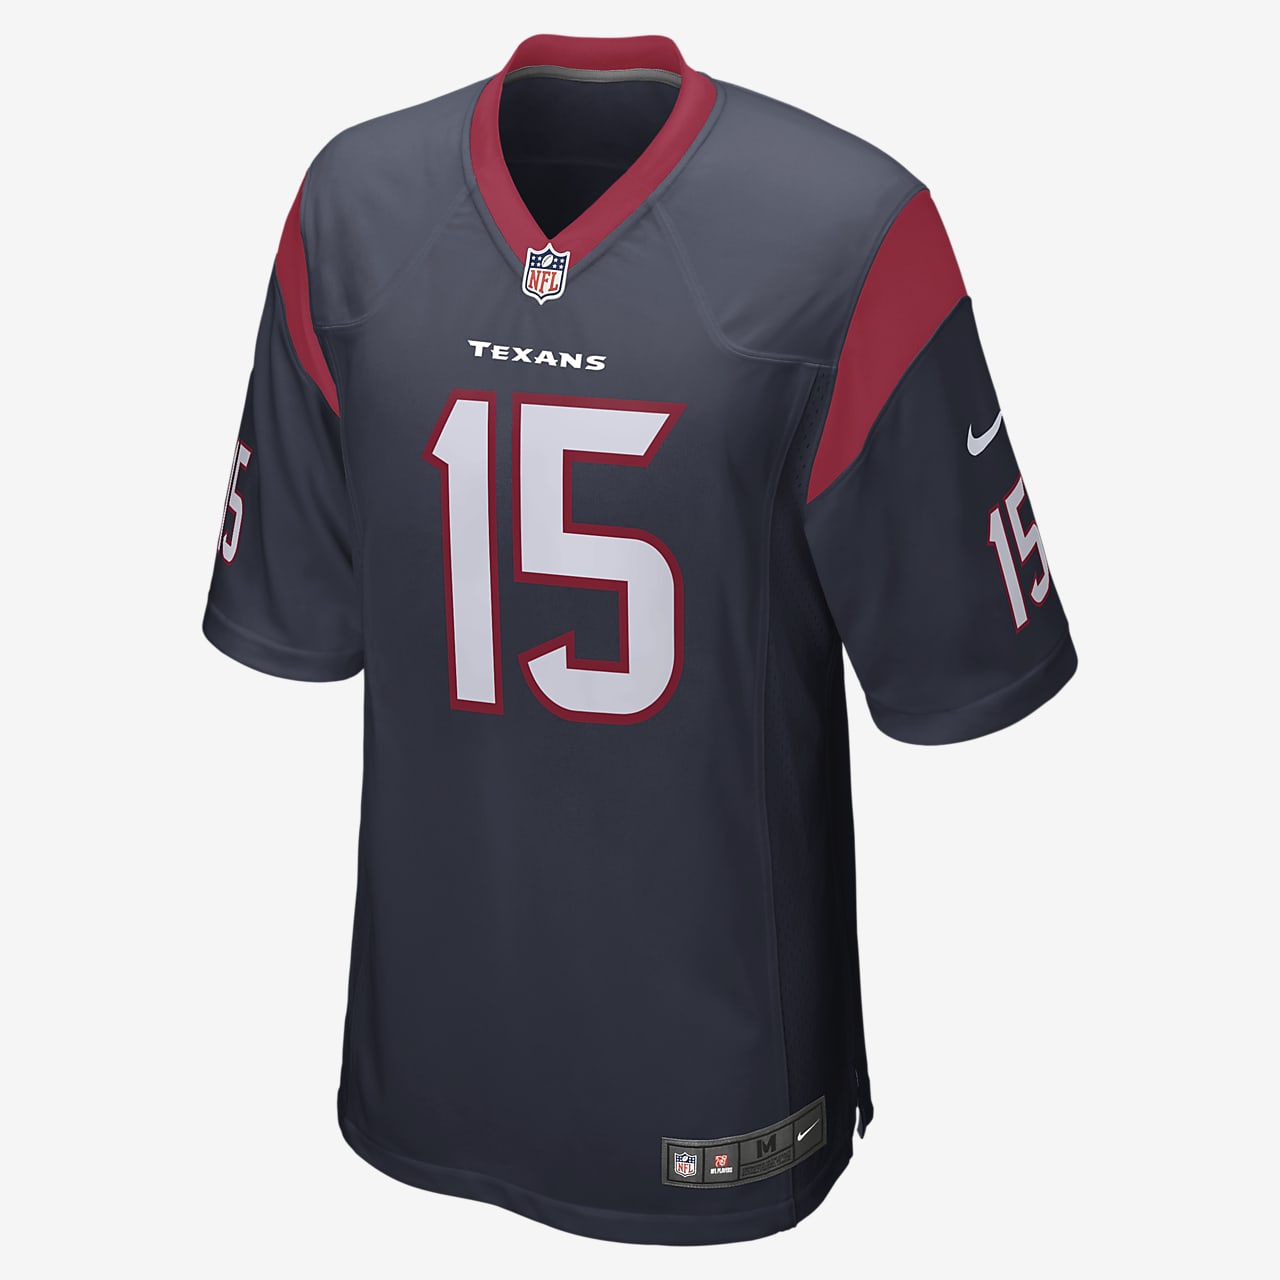 where can i buy a texans jersey